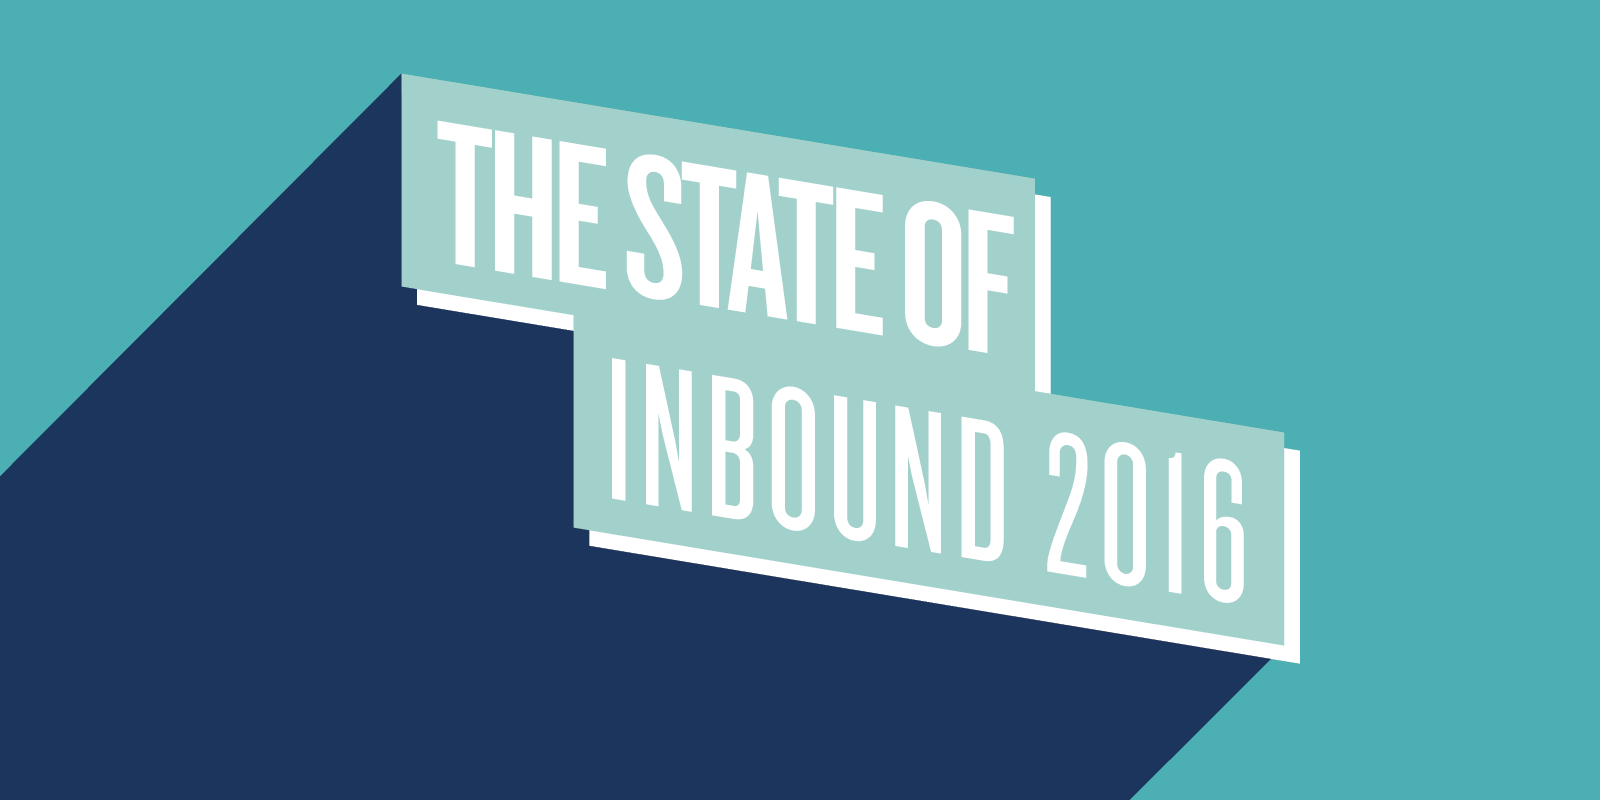 HubSpot’s State of Inbound 2016 Report Underscores a Need for Lead Generation and Conversion in EMEA